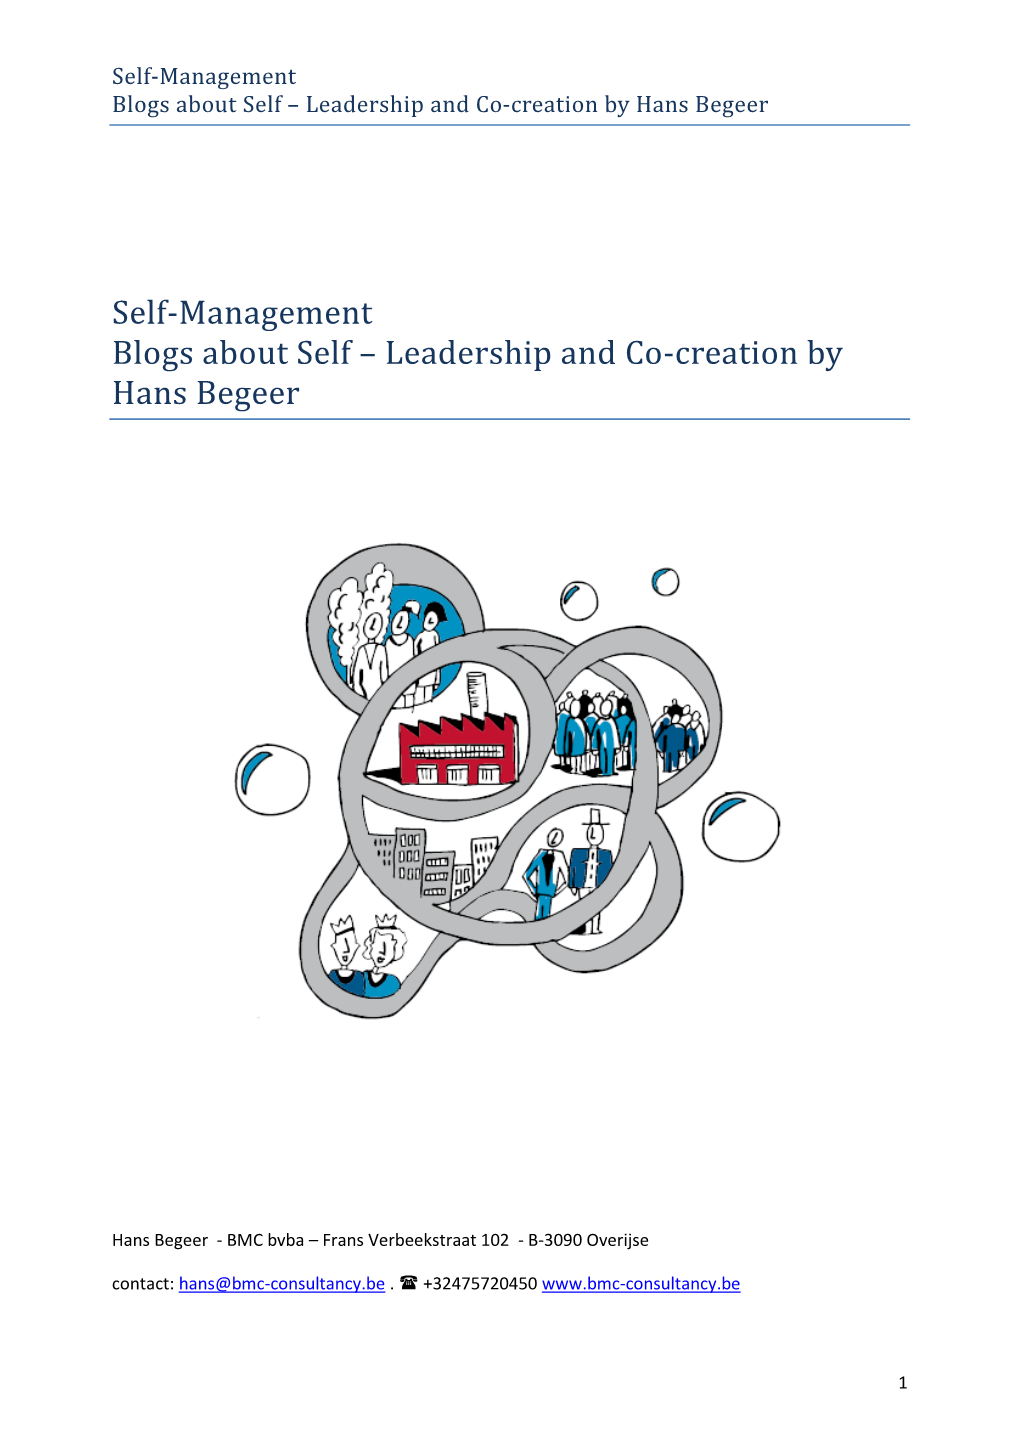 Self-Management Blogs About Self – Leadership and Co-Creation by Hans Begeer